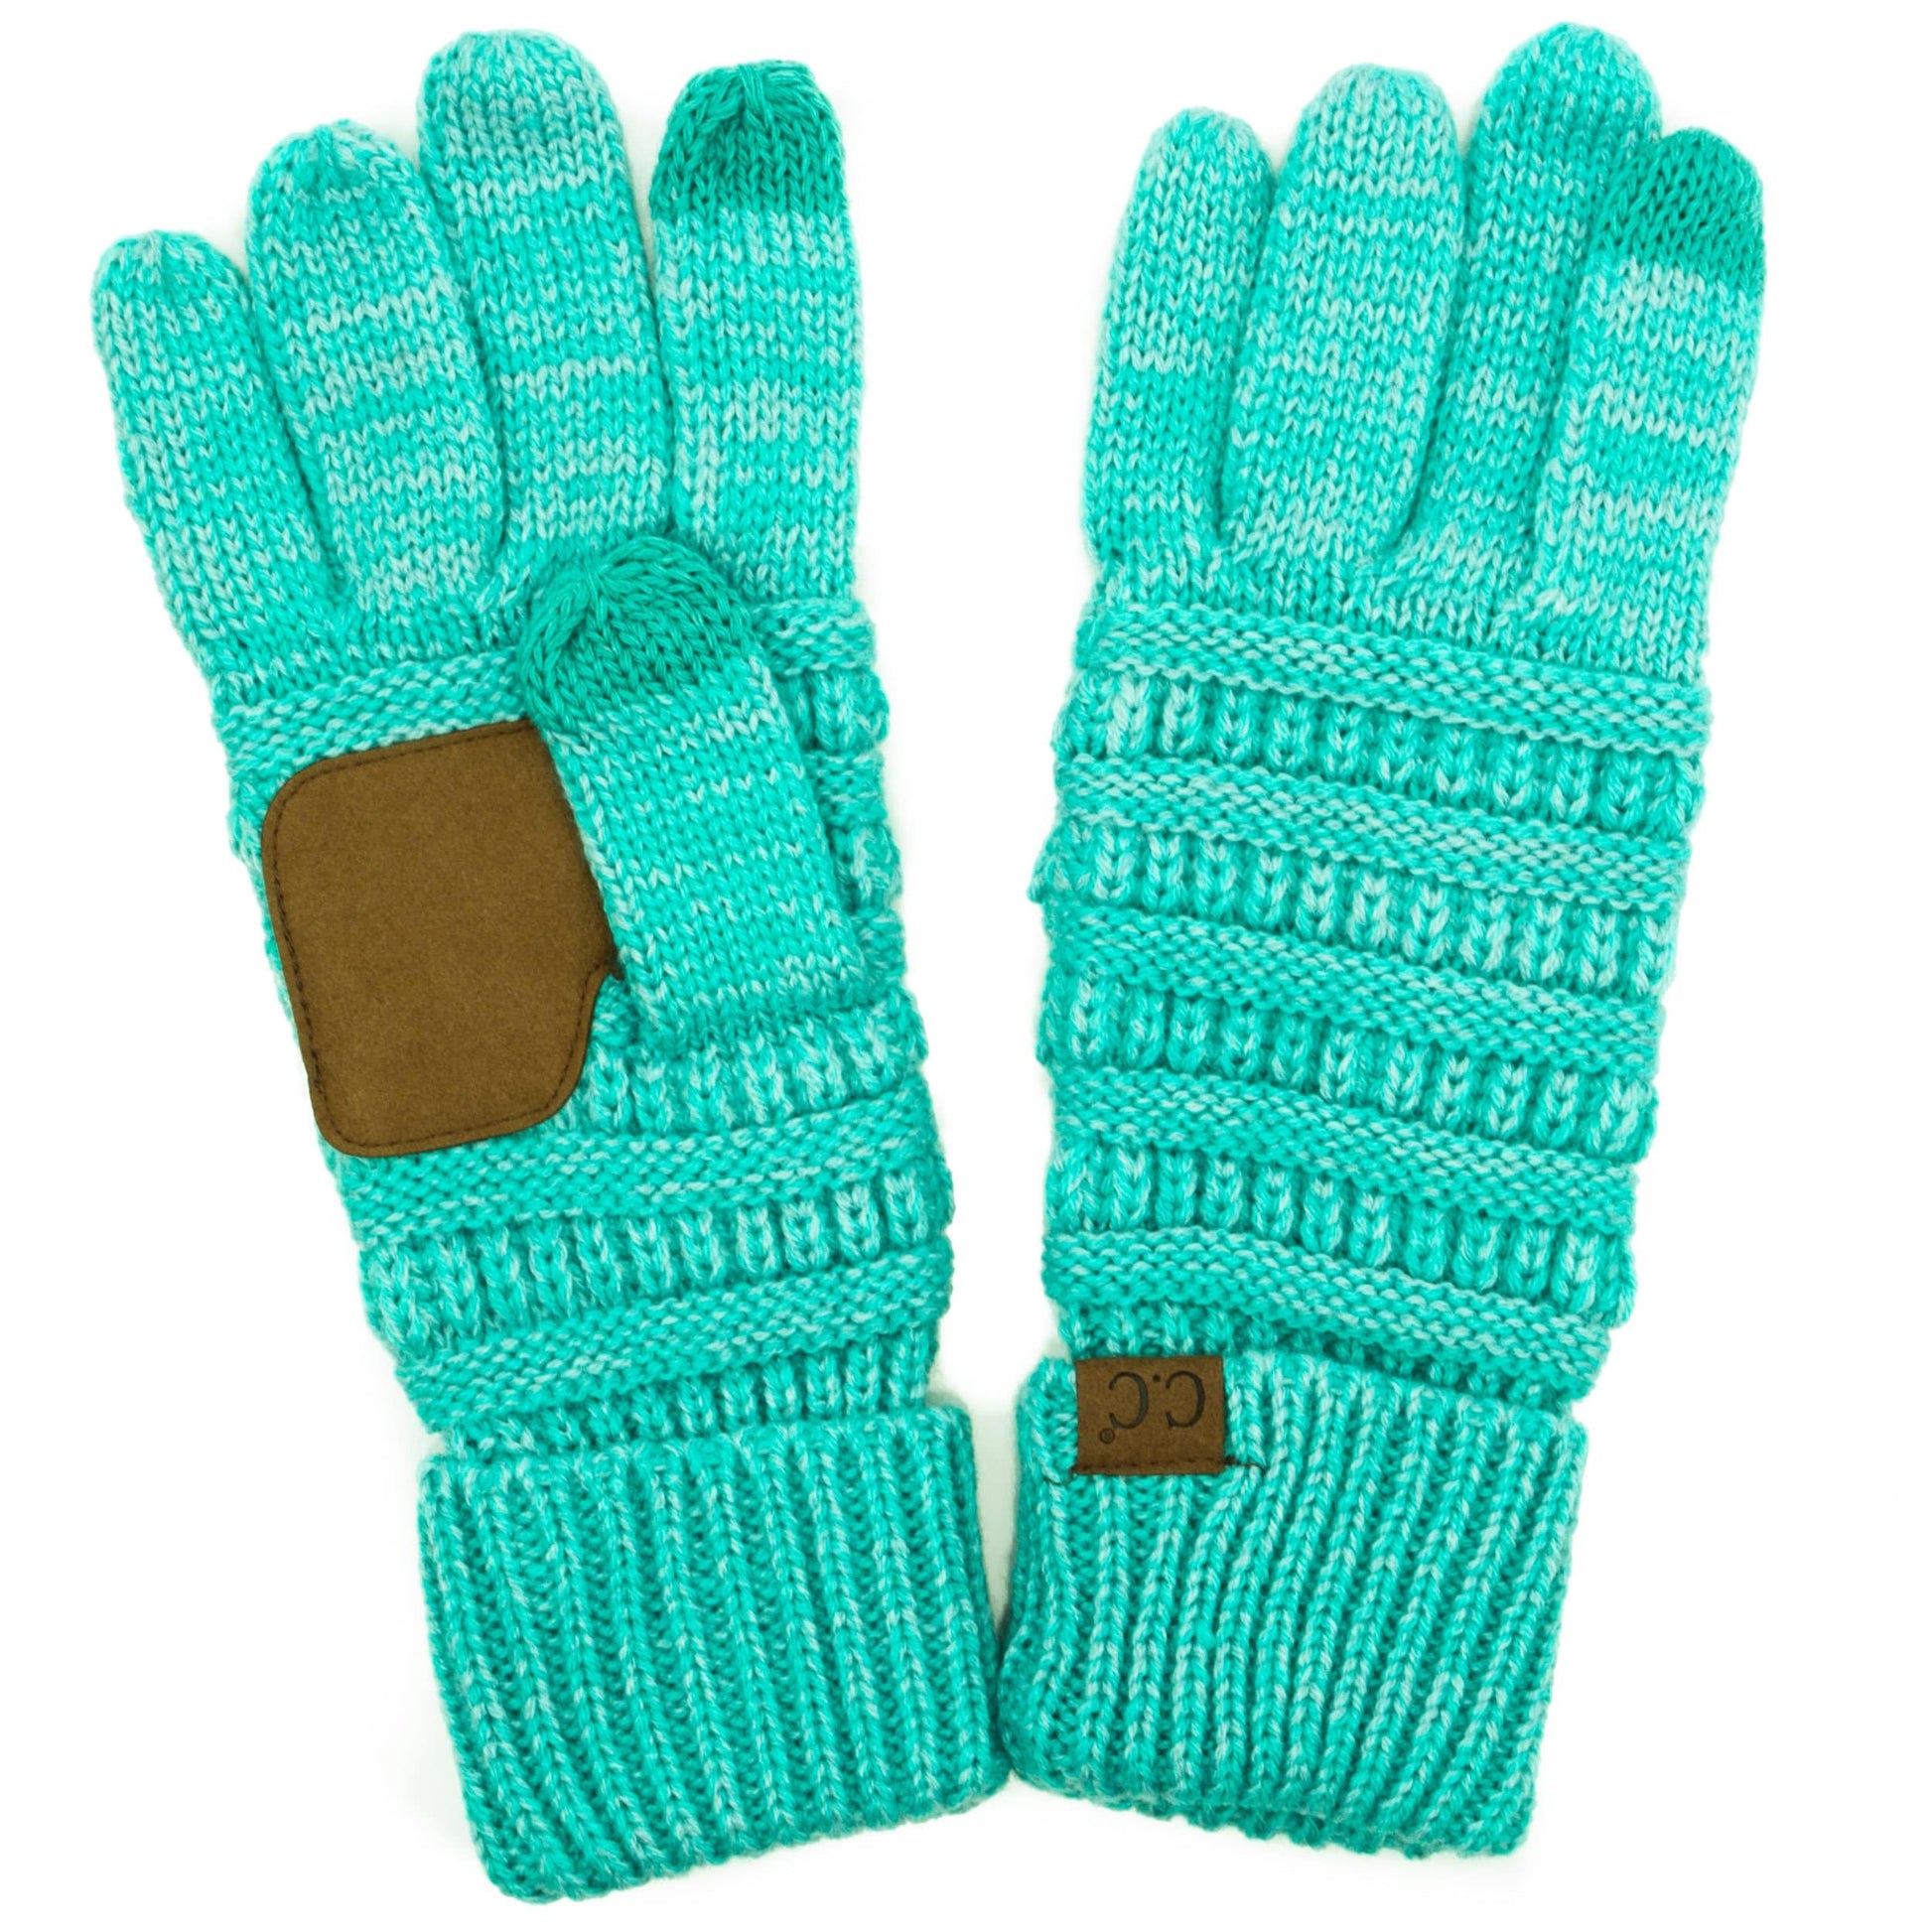 C.C Apparel Two Tone Aqua C.C Unisex Cable Knit Winter Warm Anti-Slip Two-Toned Touchscreen Texting Gloves